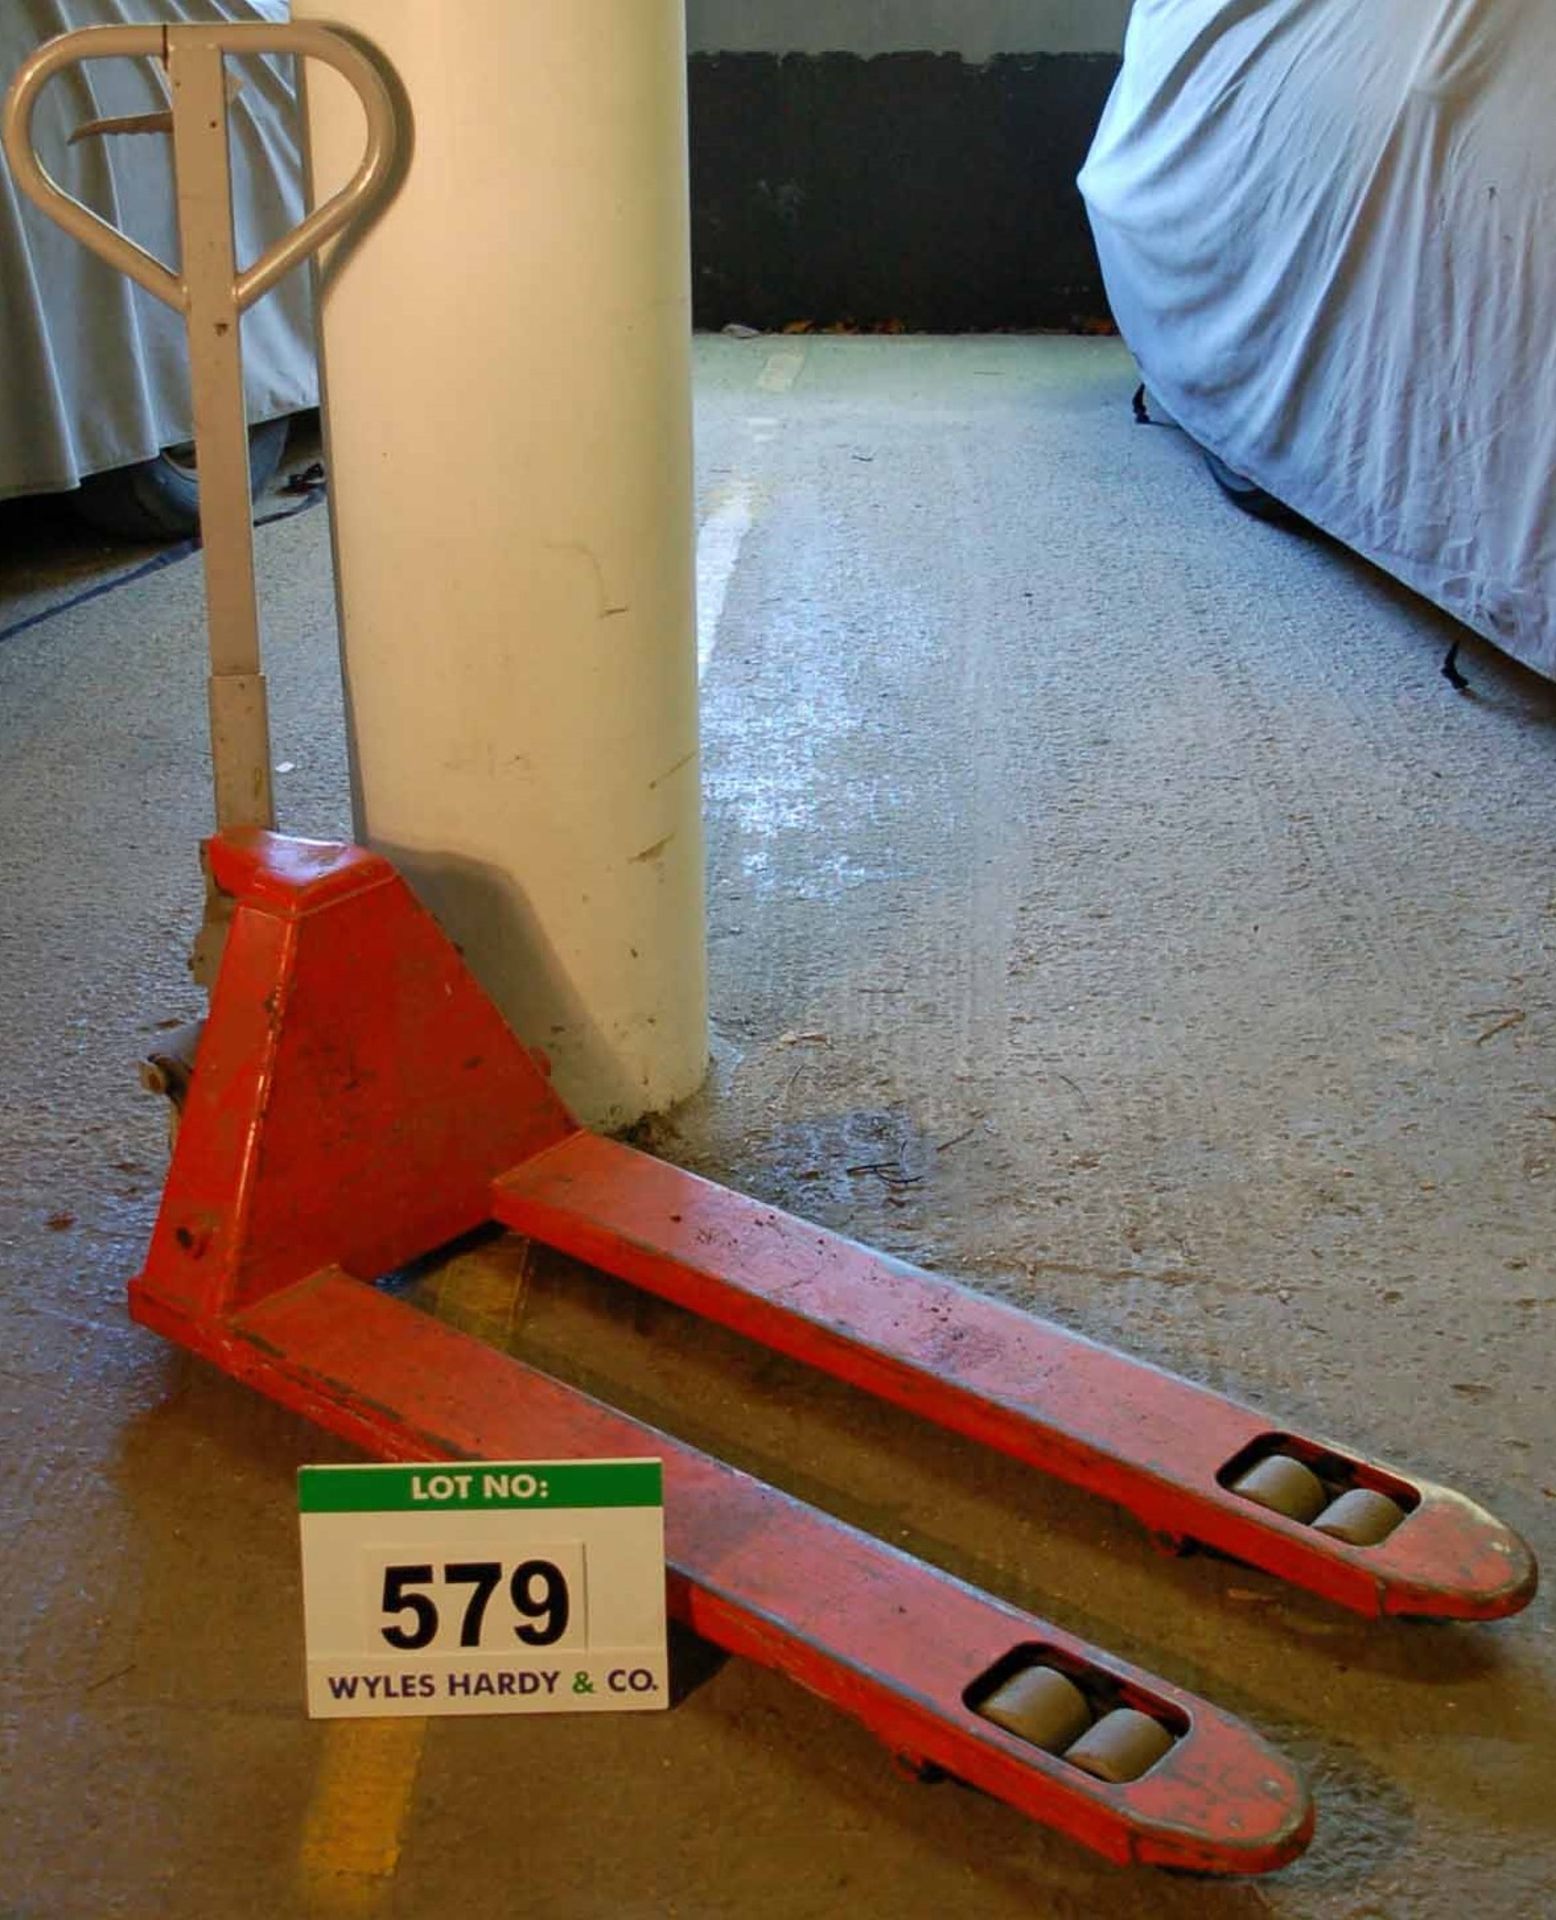 A WARRIOR 2000Kg capacity Narrow Fork Manual Hydraulic Pallet Truck (Use Reserved until 28/09/20)